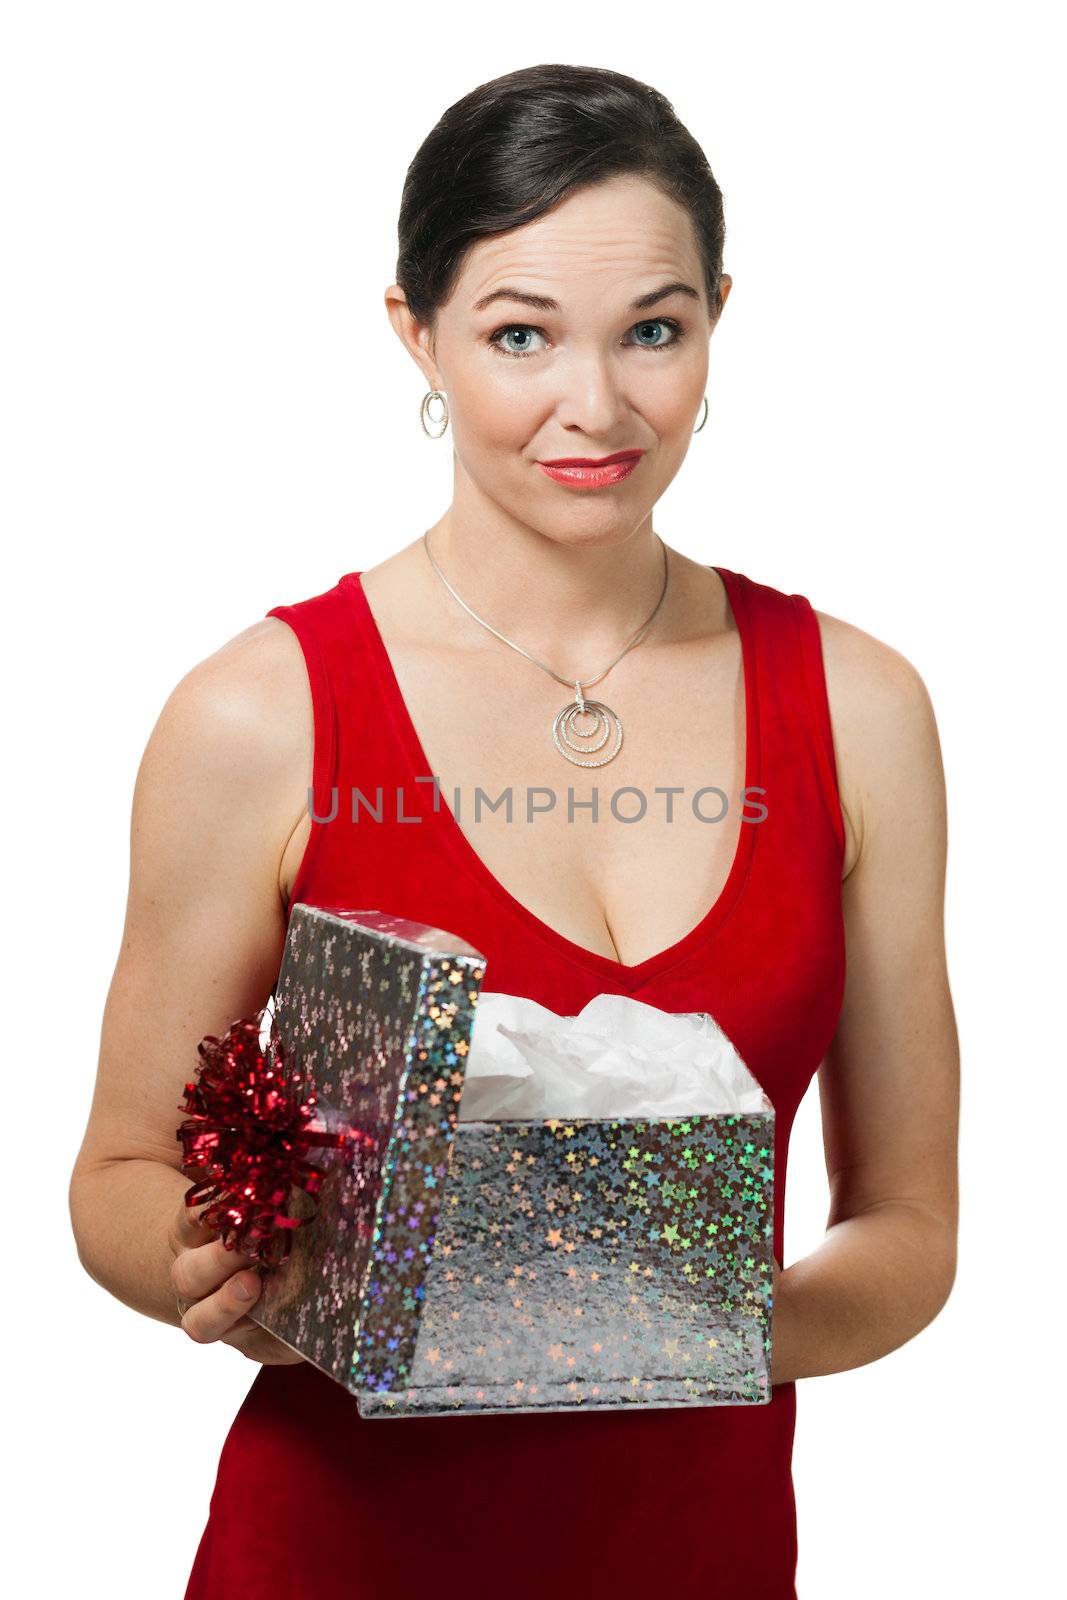 A woman disappointed woman holding a christmas gift she just opened. Isolated on white.